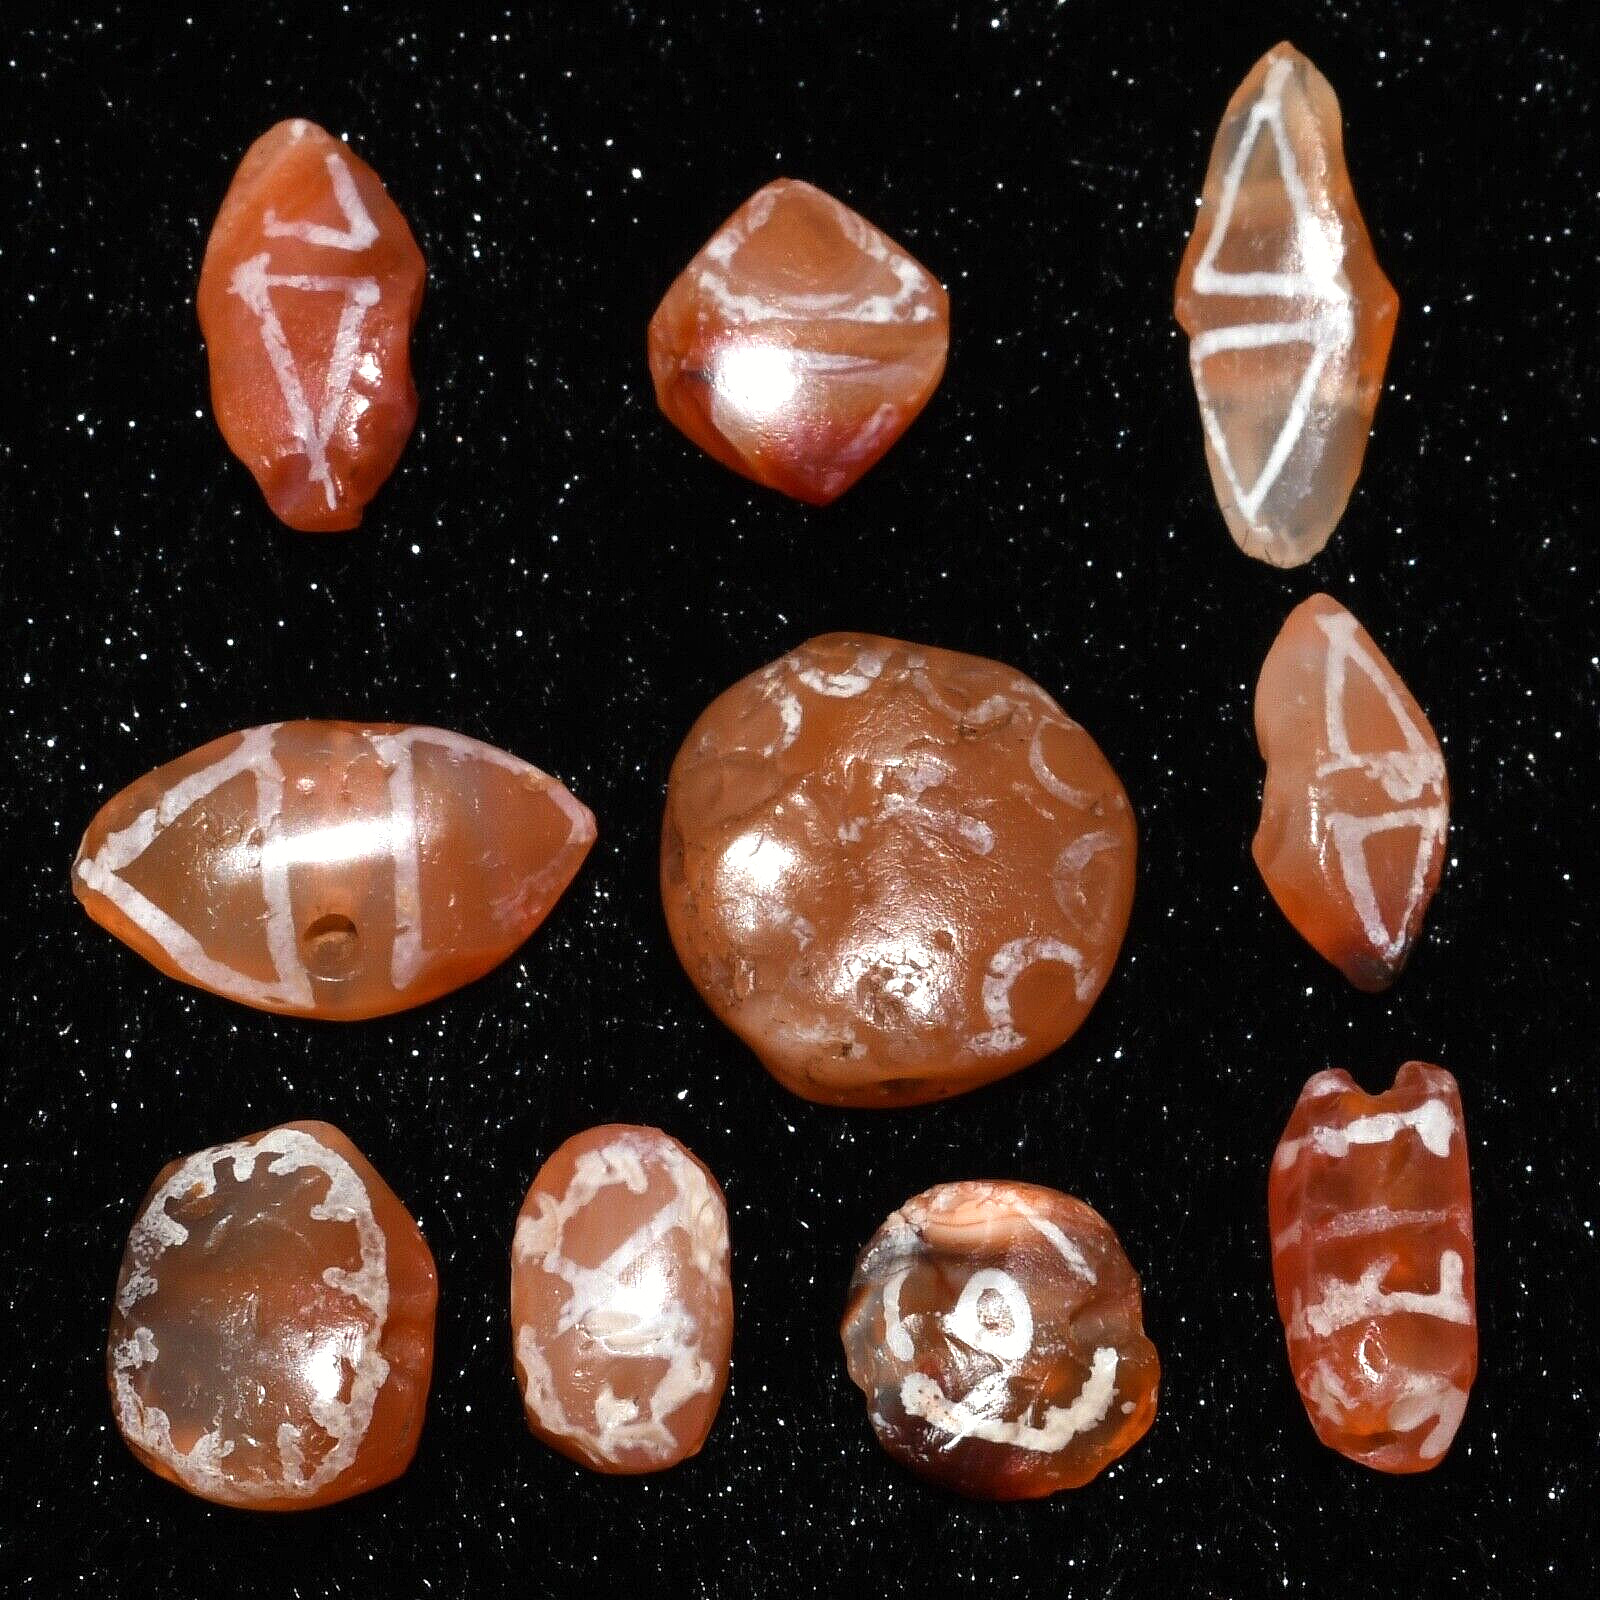 10 Genuine Ancient Near Eastern Etched Carnelian Beads over 1000 Years Old